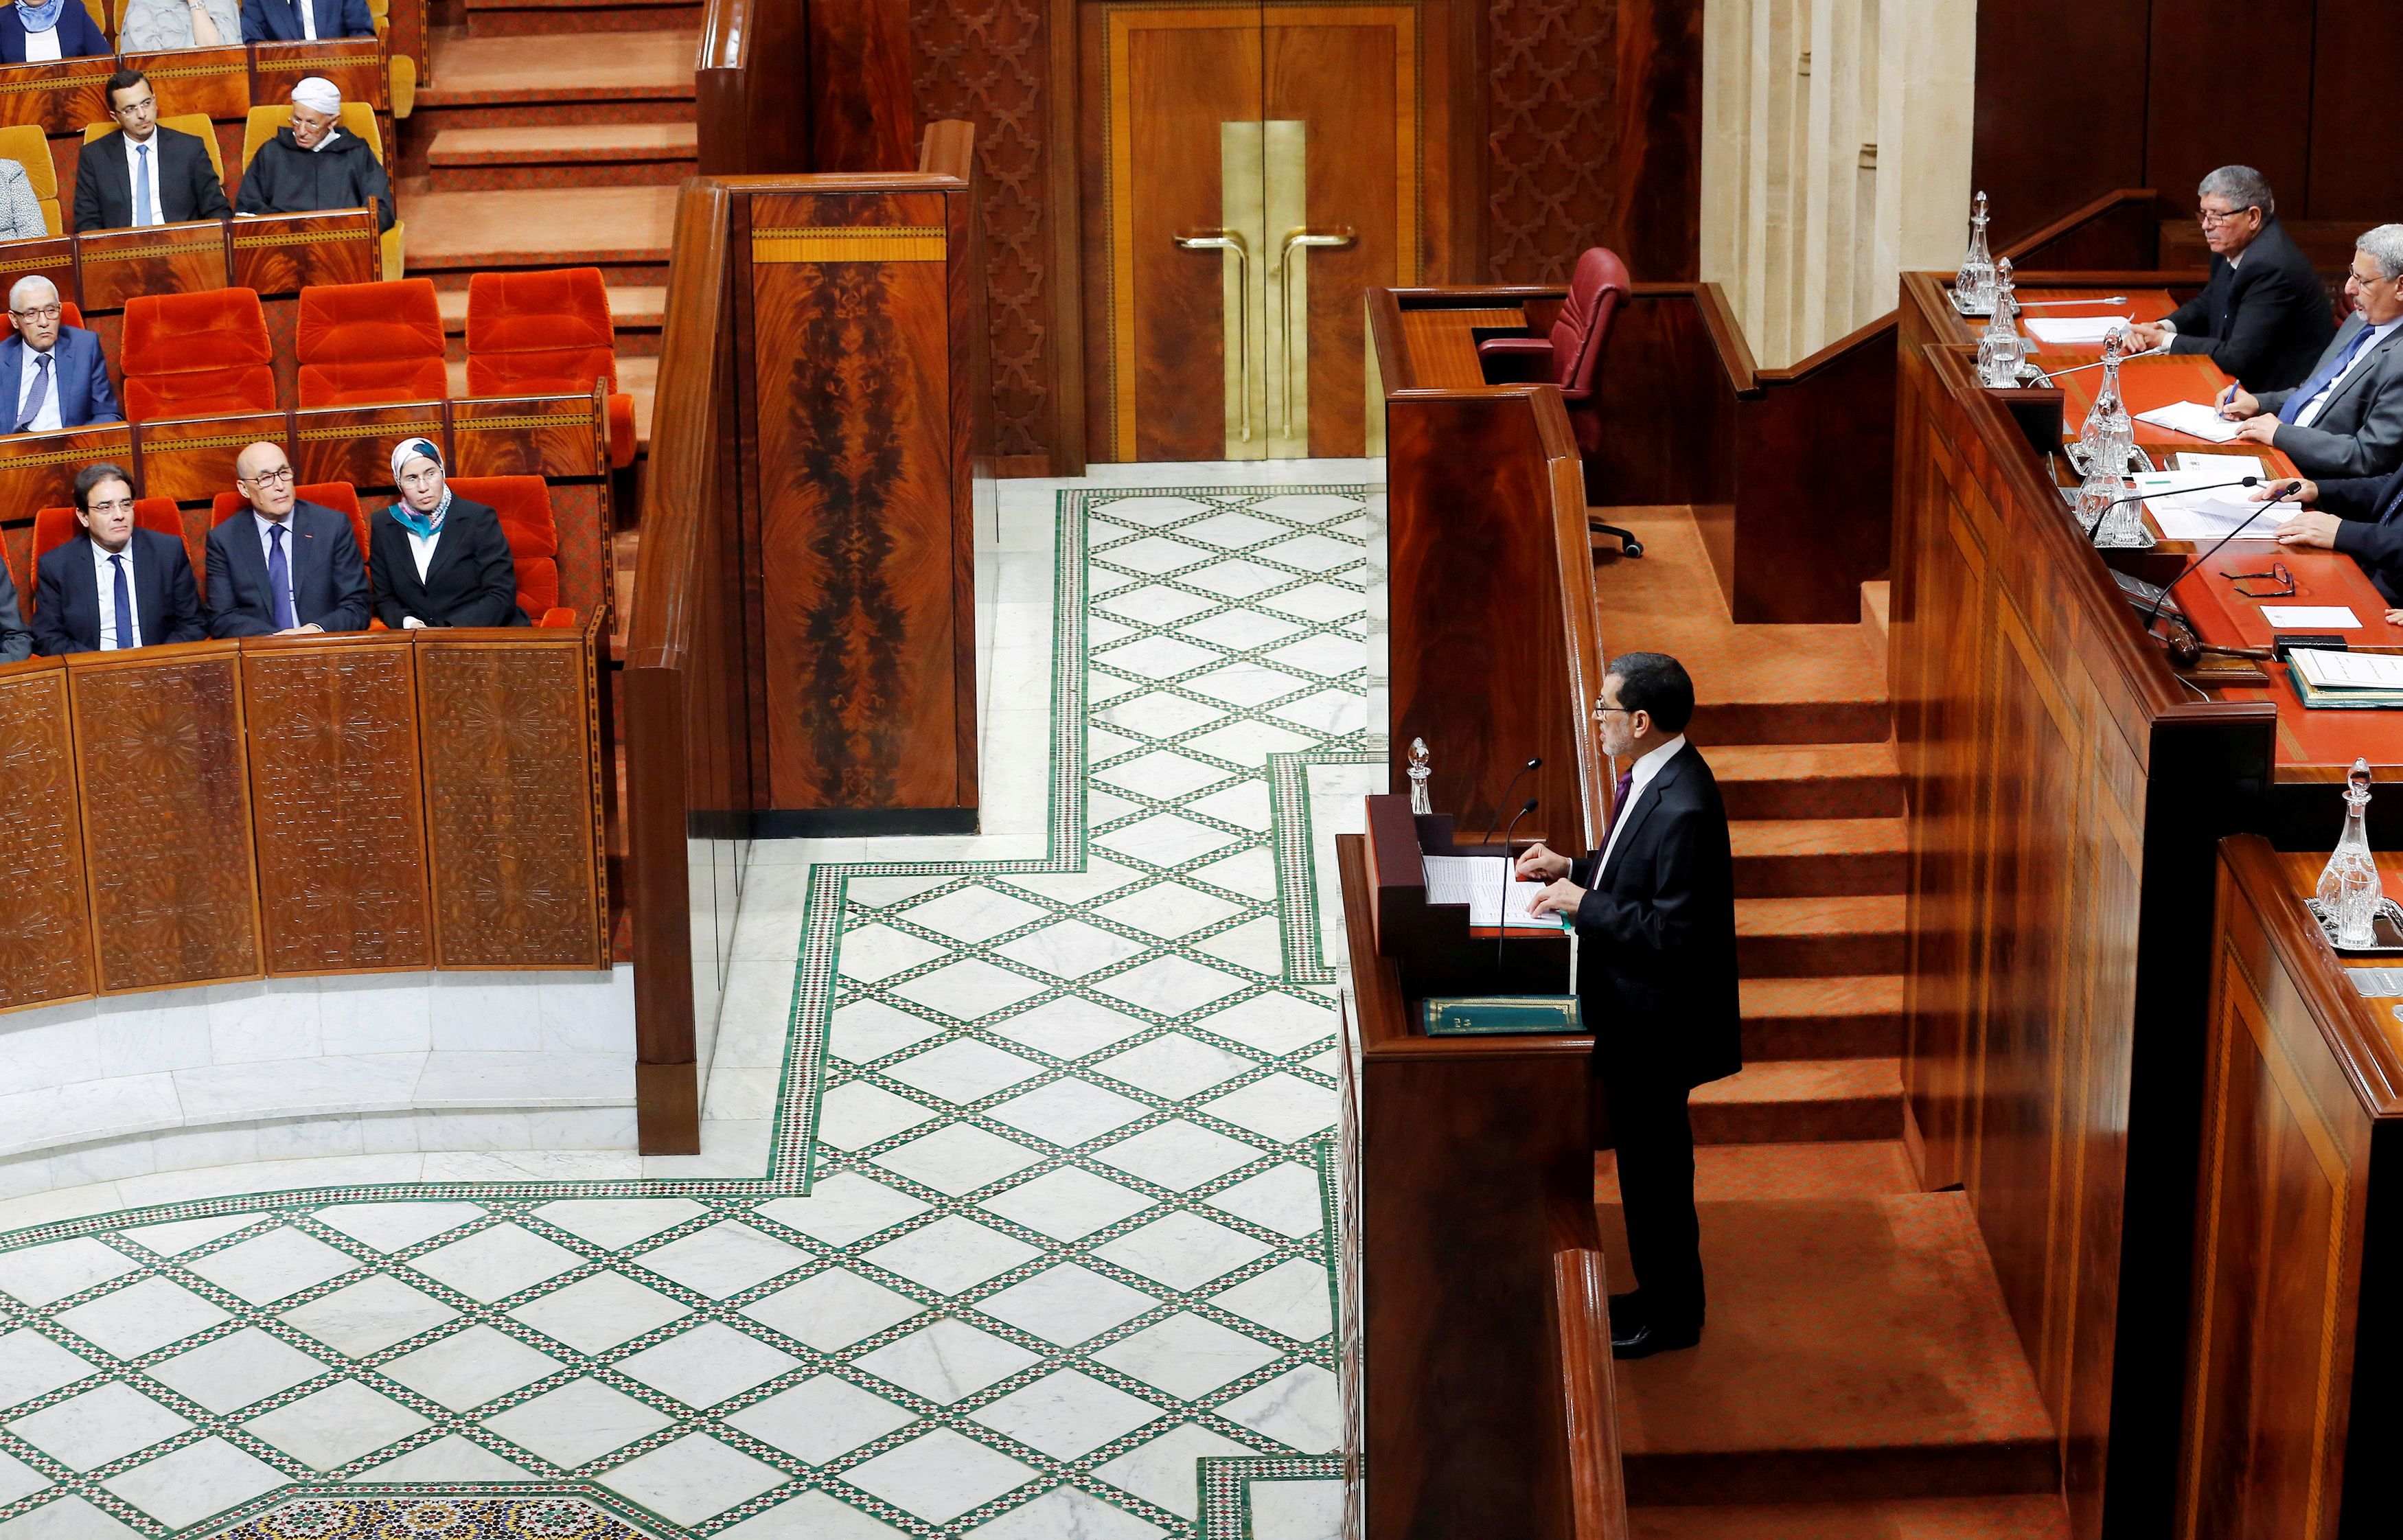 Moroccan Prime Minister Saad Eddine el-Othmani delivers his first speech presenting the government's program at the Moroccan Parliament in Rabat